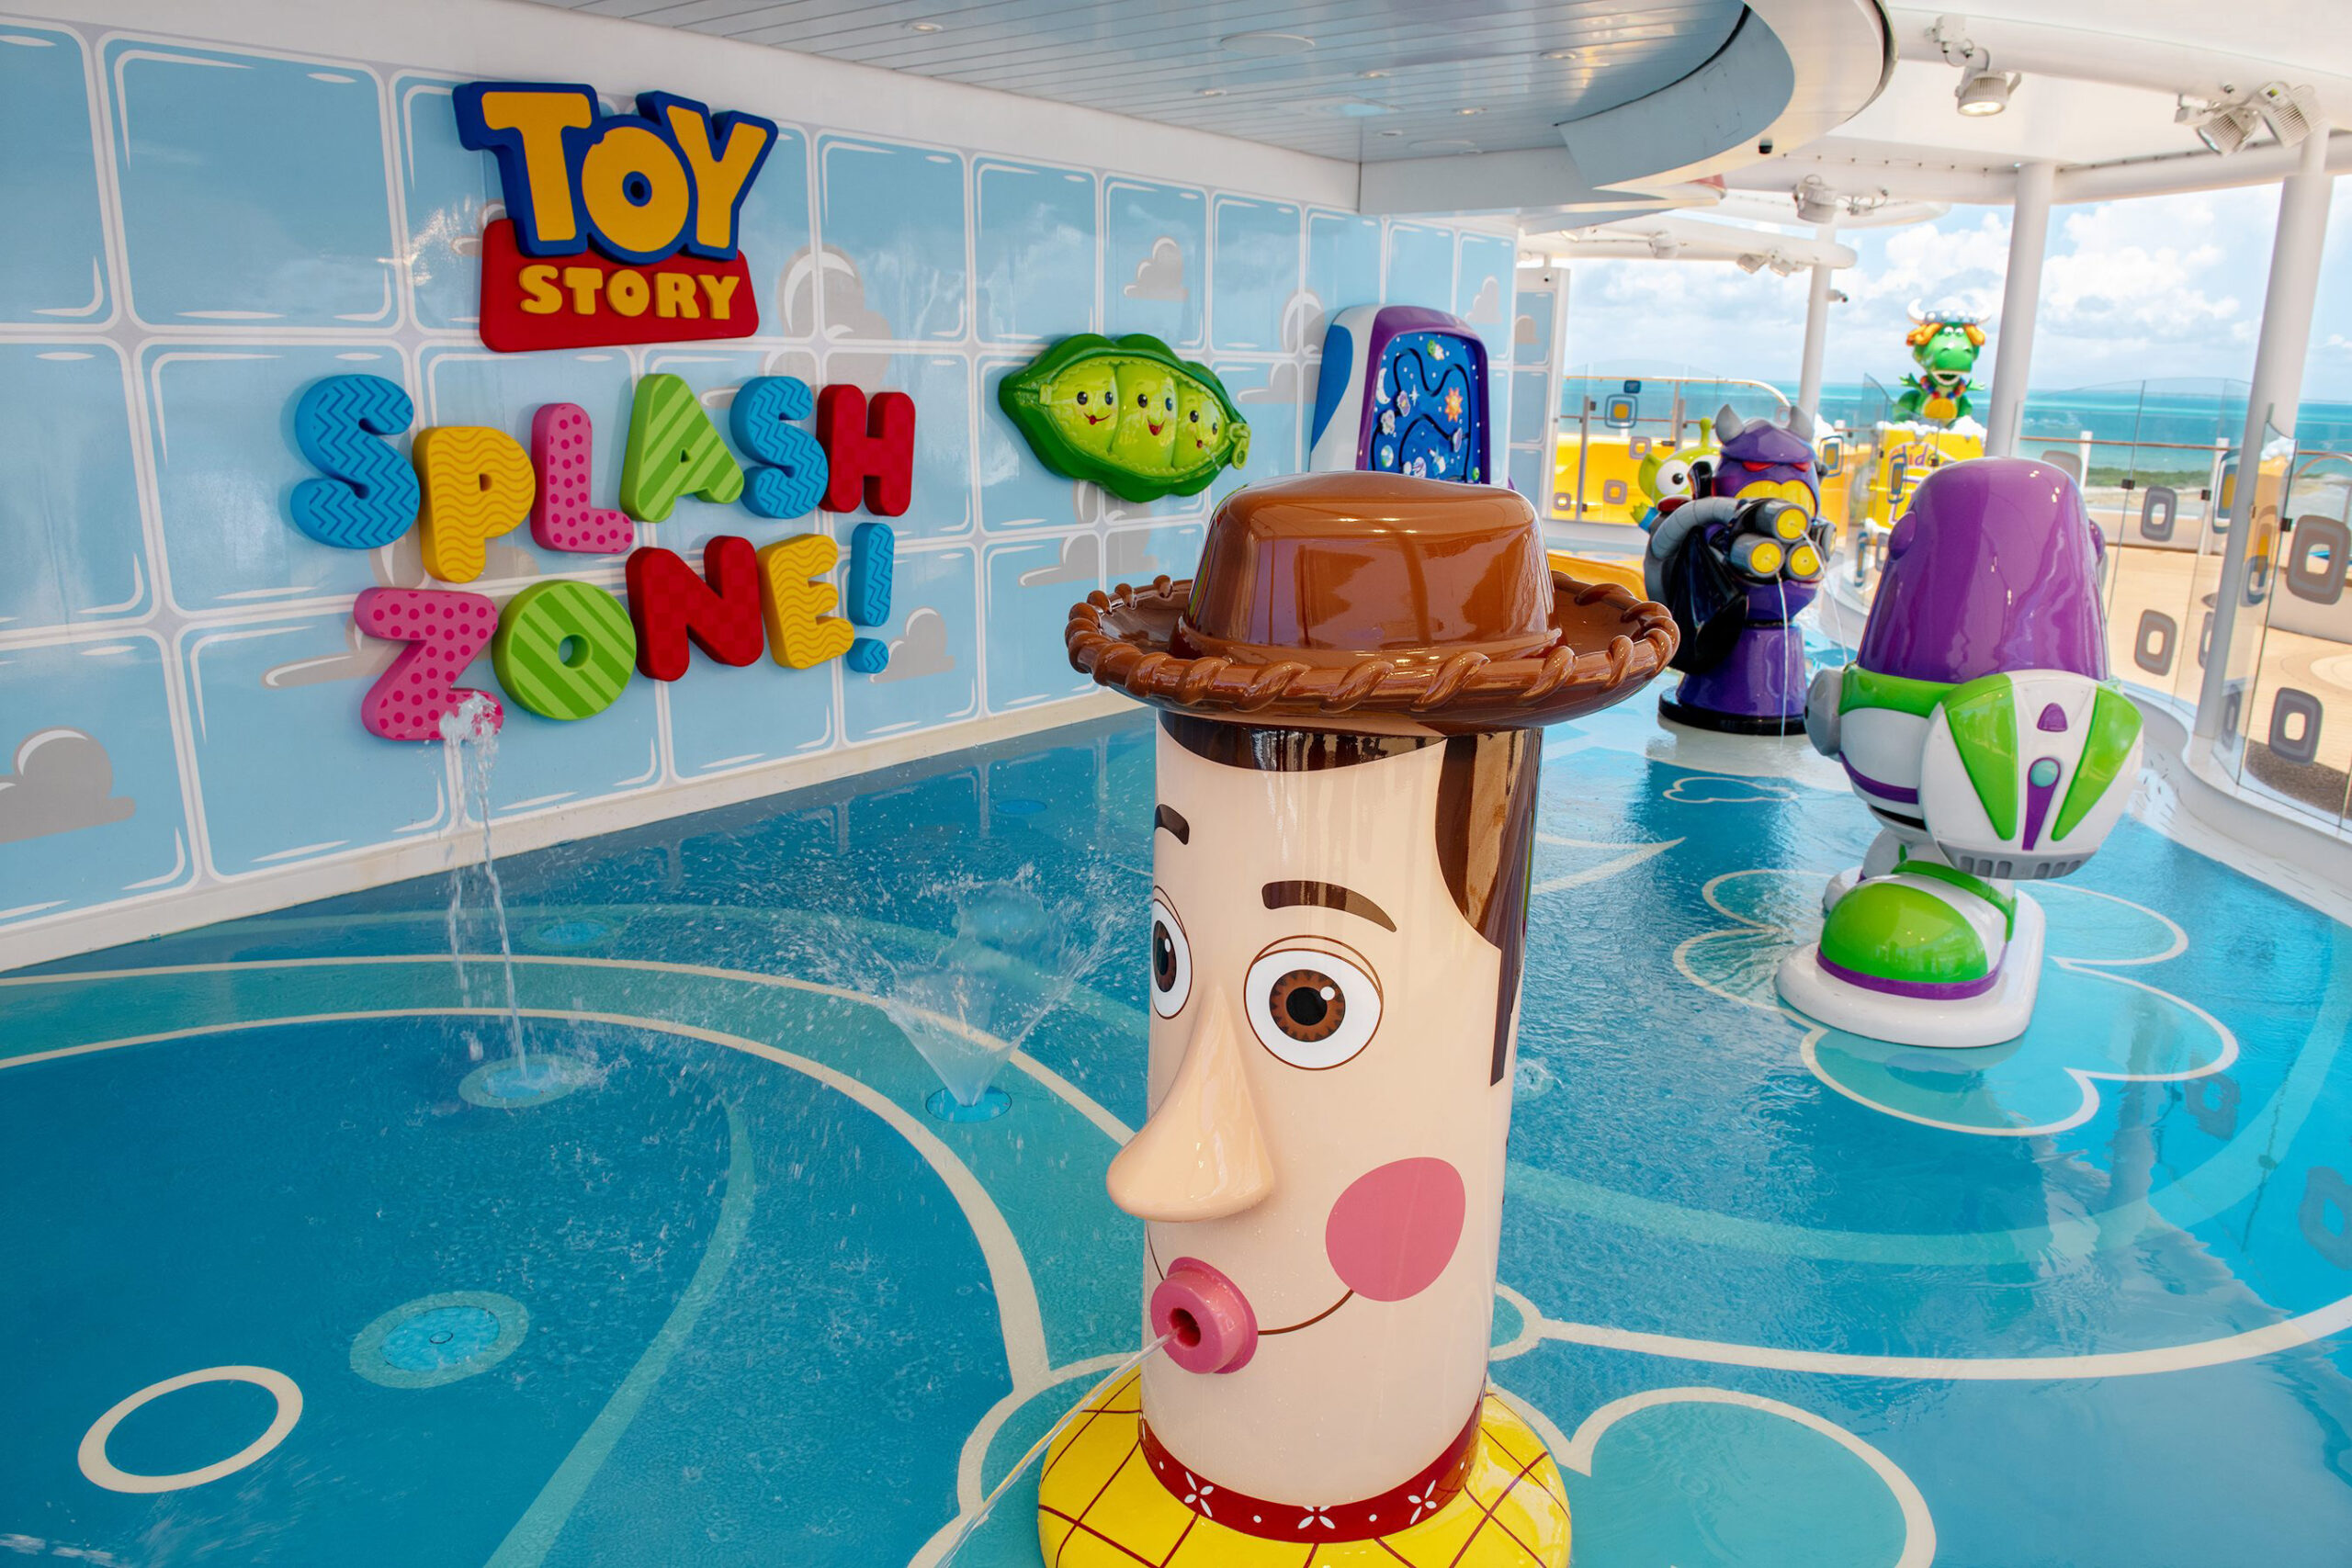 Little ones will go “to swim-finity and beyond” in a Toy Story-themed district designed especially for families with toddlers and young children onboard the Disney Treasure. The expansive deck area will include Toy Story Splash Zone, Trixie’s Falls wading pool, Slide-a-Saurus Rex family waterslide and Weezy’s Freezies smoothie bar. (Disney)